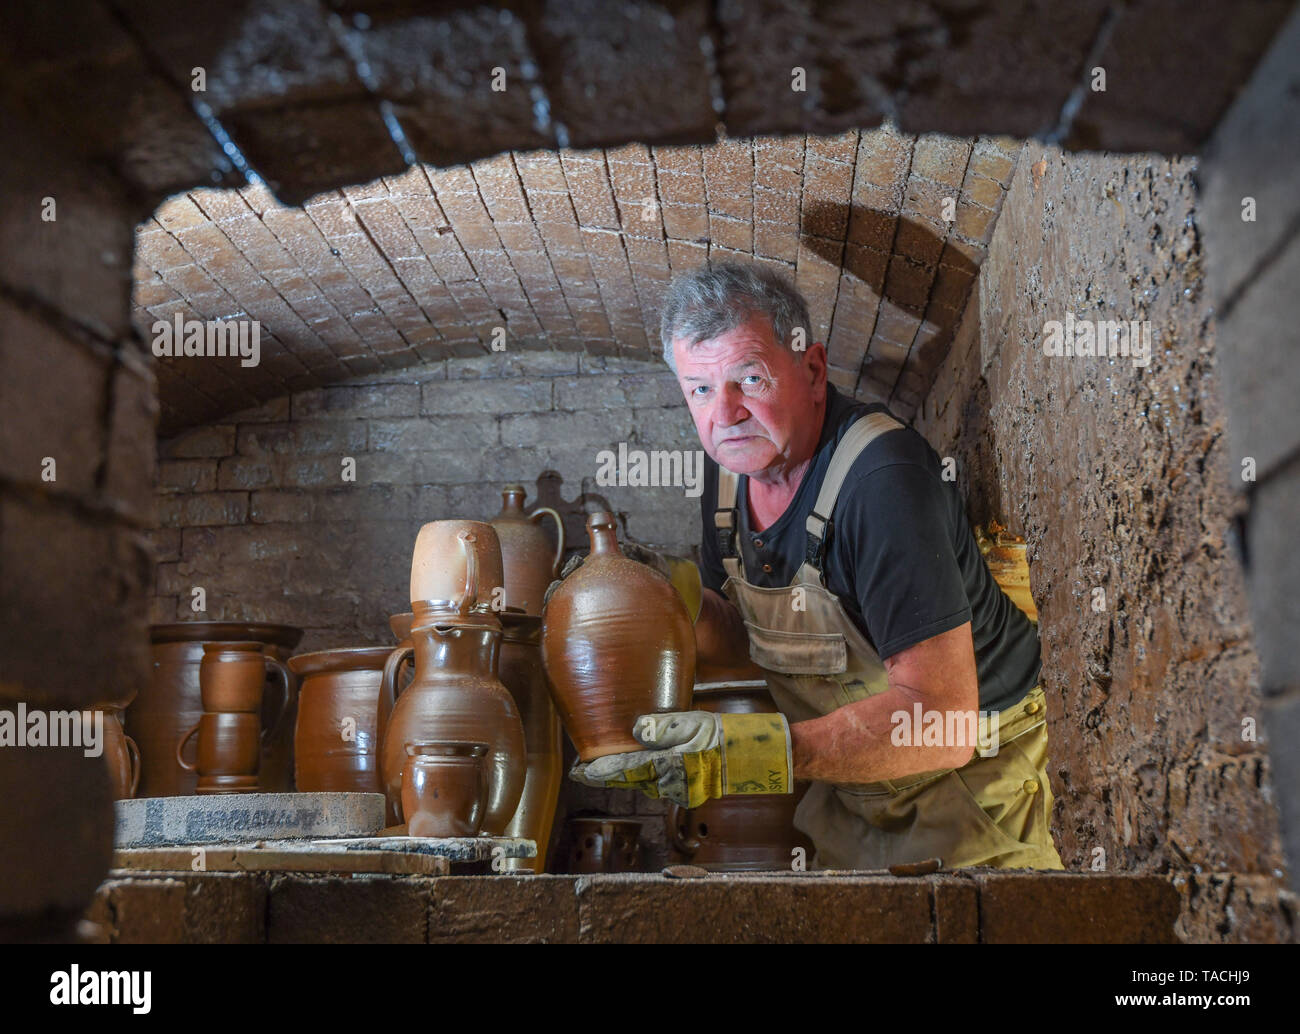 24 May 2019, Brandenburg, Groß Neuendorf: Manfred Dannegger, a potter, stands in his still hot oven and removes burnt jugs, cups and other vessels from the combustion chamber. Since 1997 the potter has been producing this clay glazed stoneware in the tradition of Bunzlau brownware. The dishes are fired in the oven at about 1300 degrees Celsius for about 20 hours. The oven must then cool for four days. This weekend (25.05./26.05.) the 12th pottery market will take place in Groß Neuendorf. Then 22 potters from near and far present themselves directly at the dike of the German-Polish border river Stock Photo